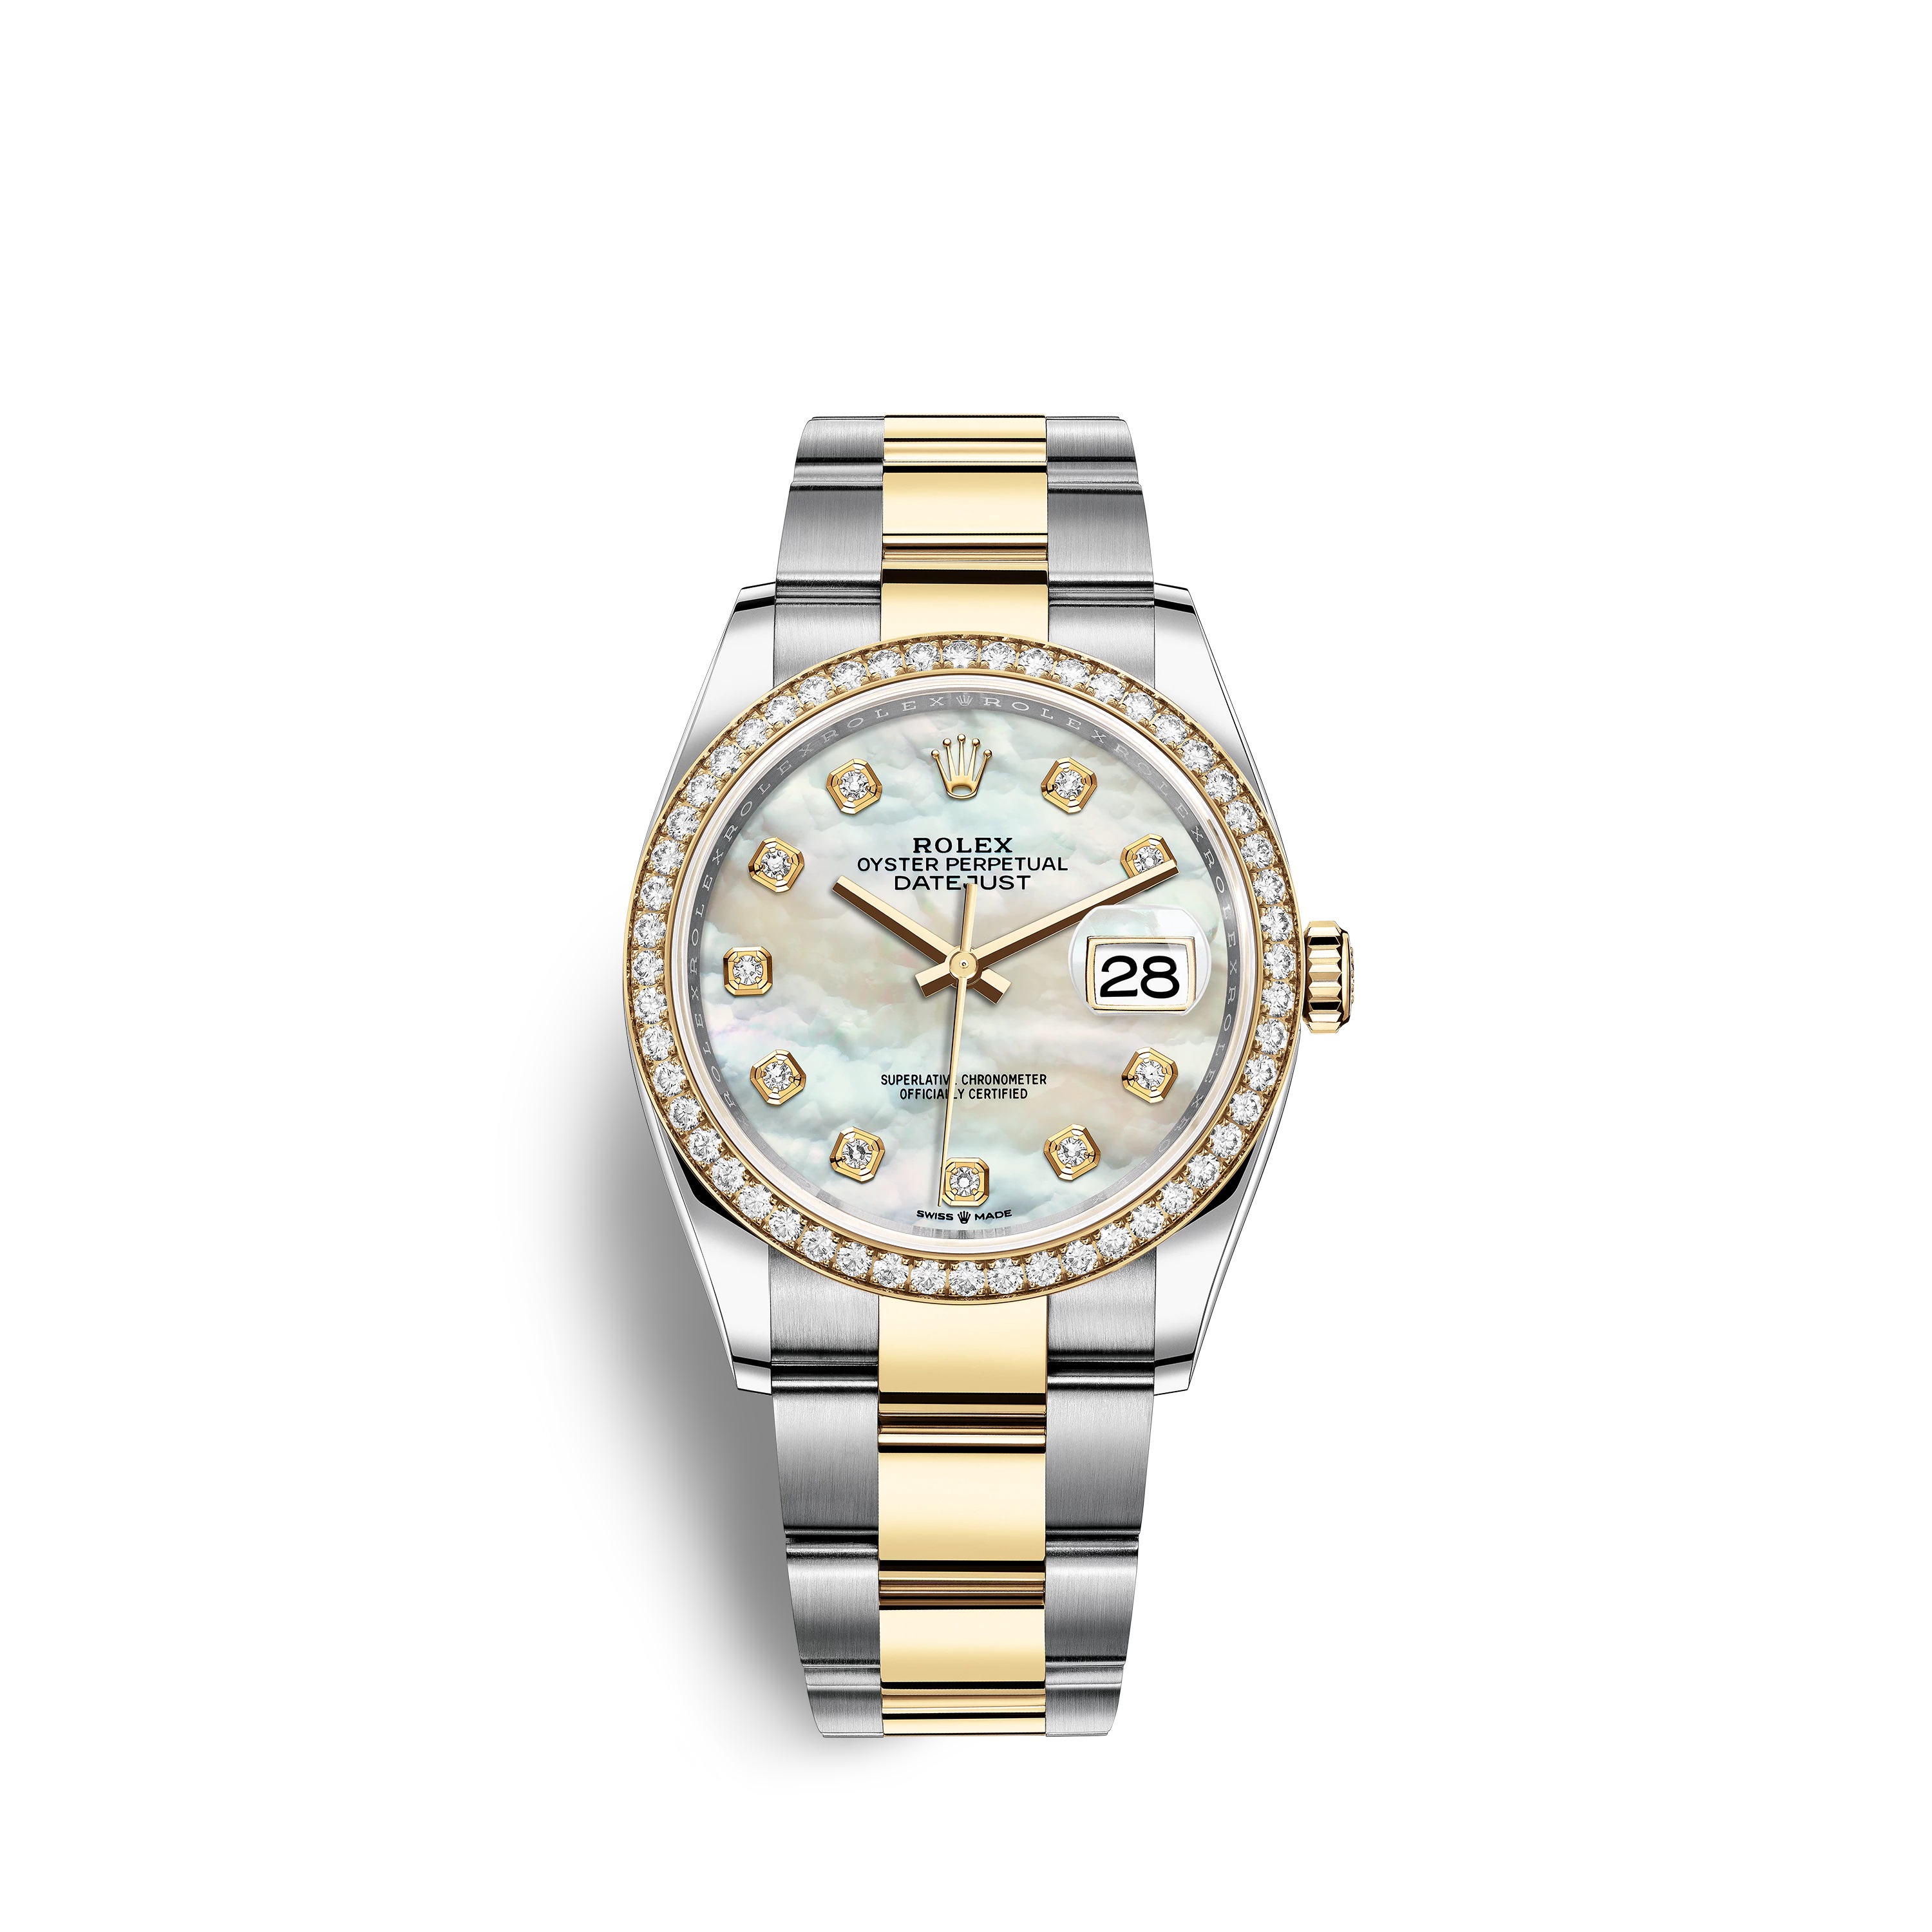 Datejust 36 126283RBR Gold & Stainless Steel Watch (White Mother-of-Pearl Set with Diamonds)